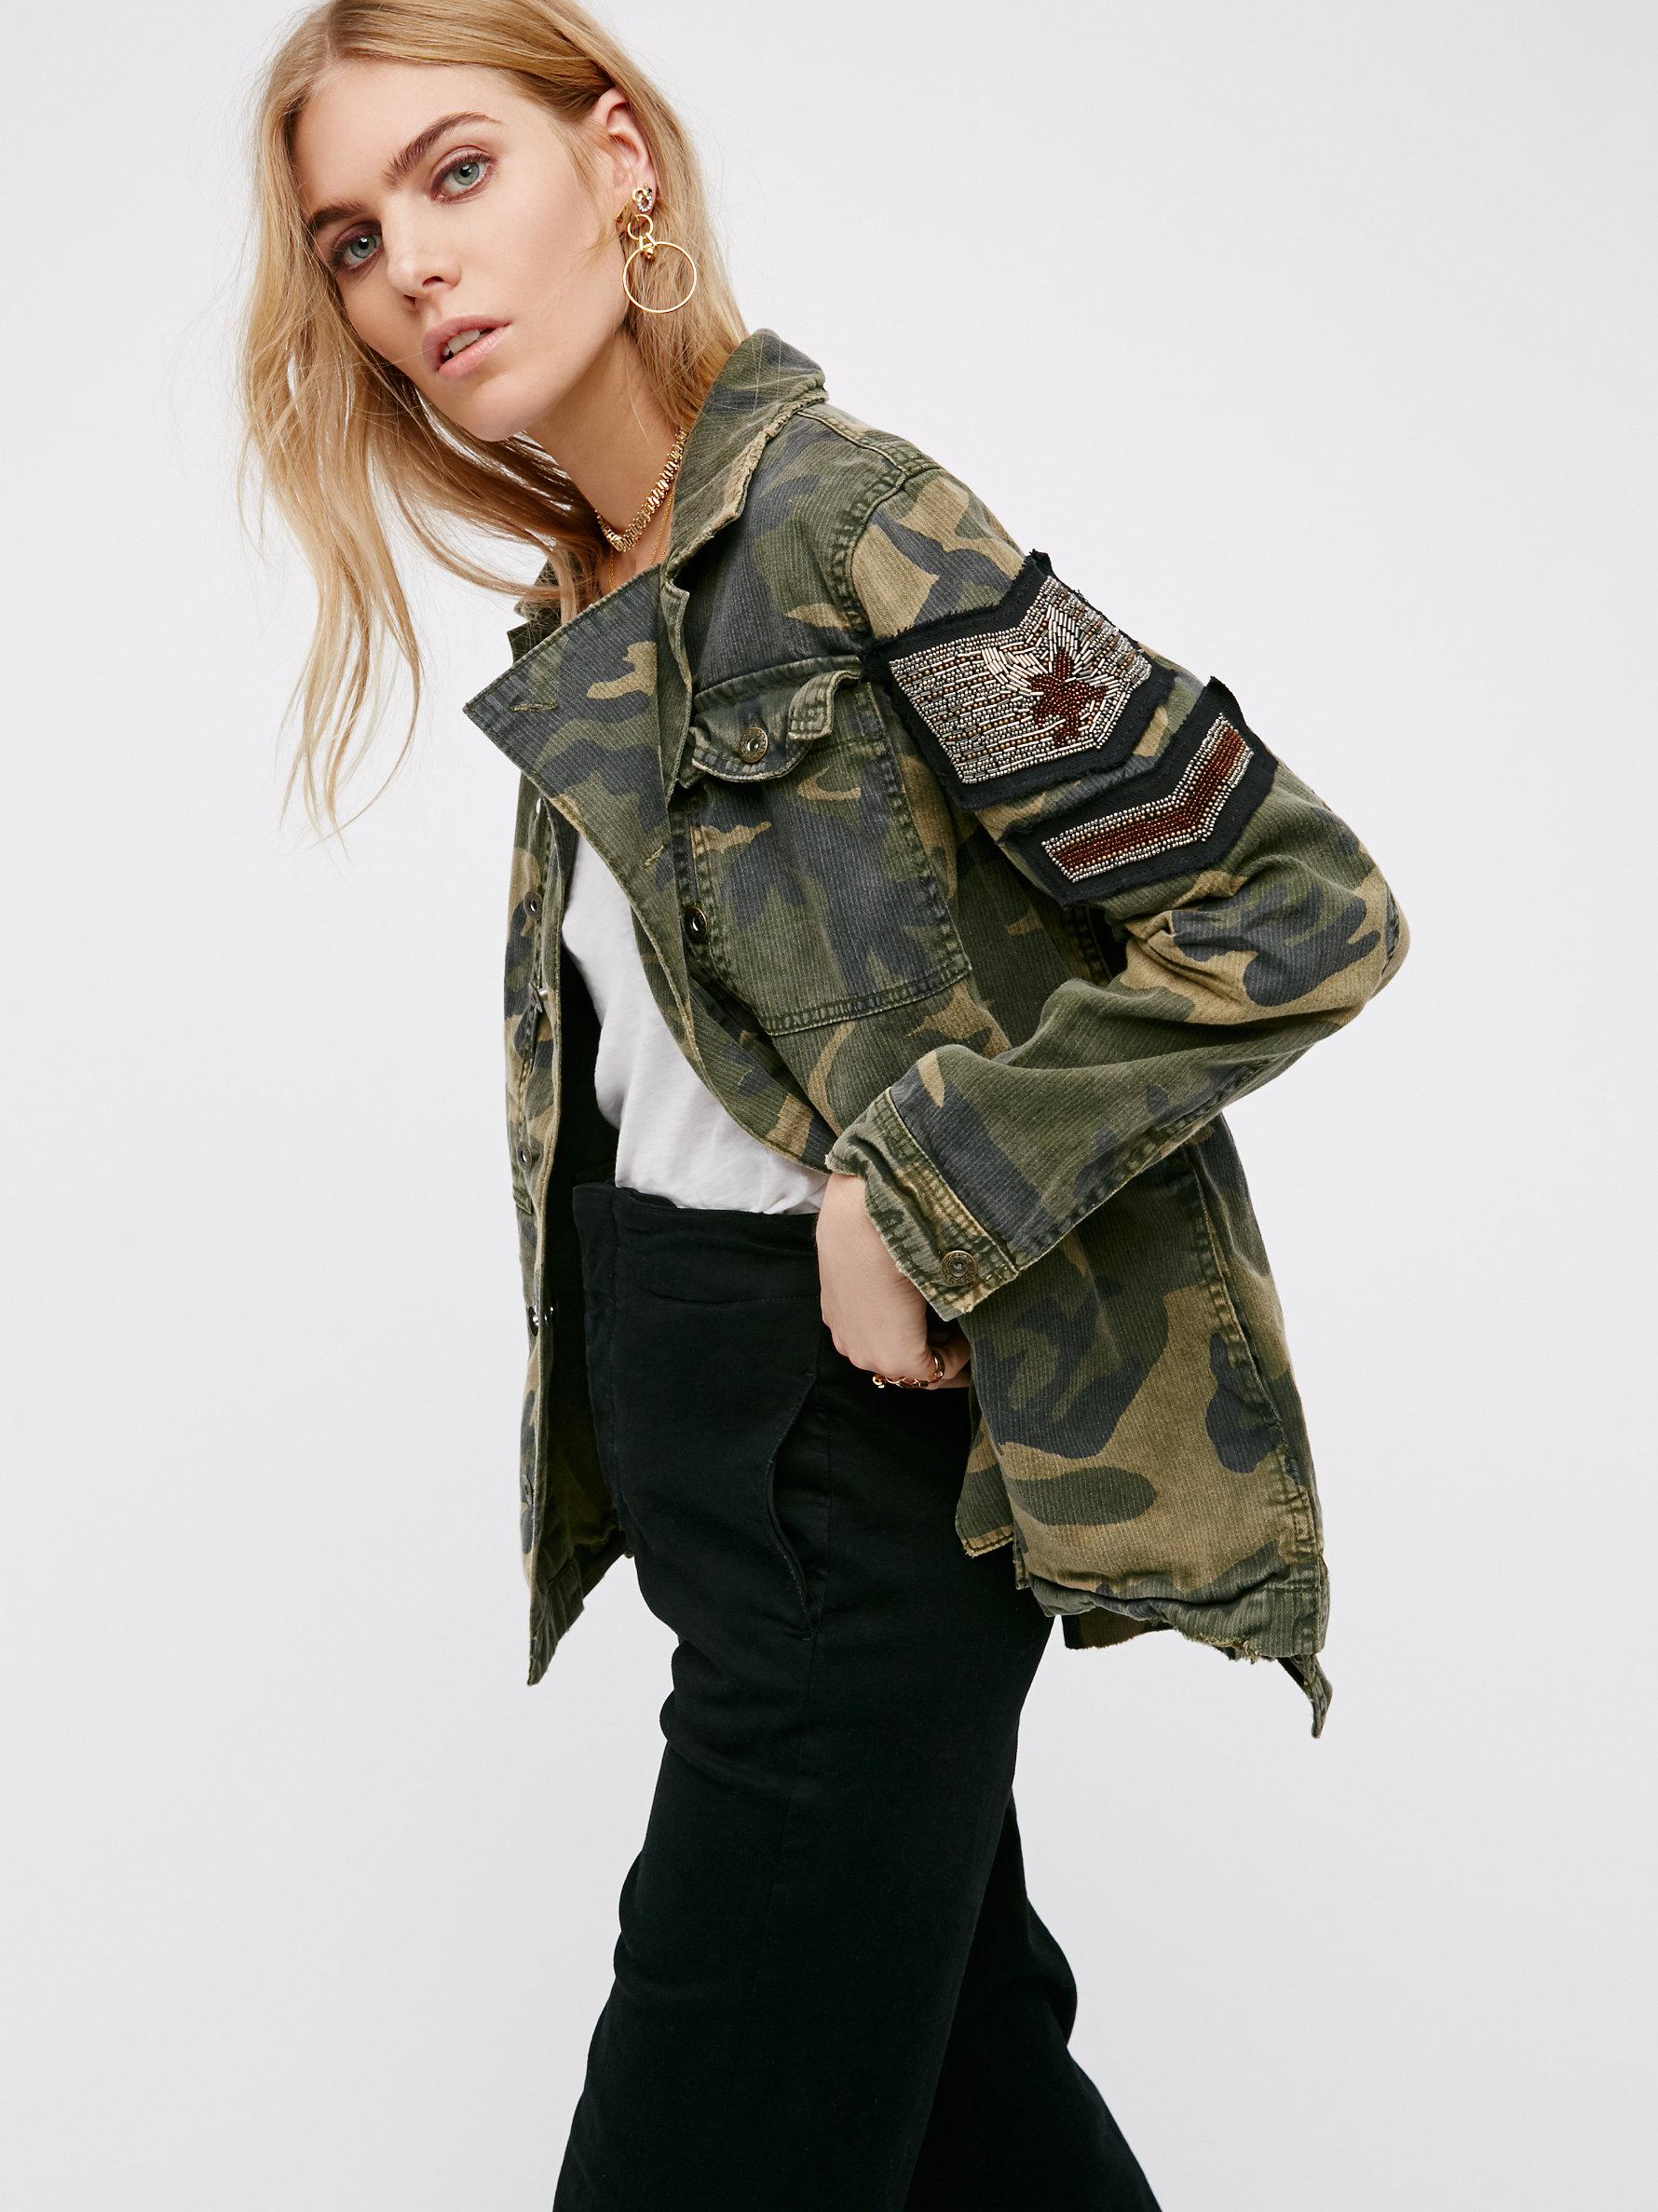 Lyst Free People Embellished Military Shirt Jacket in Green